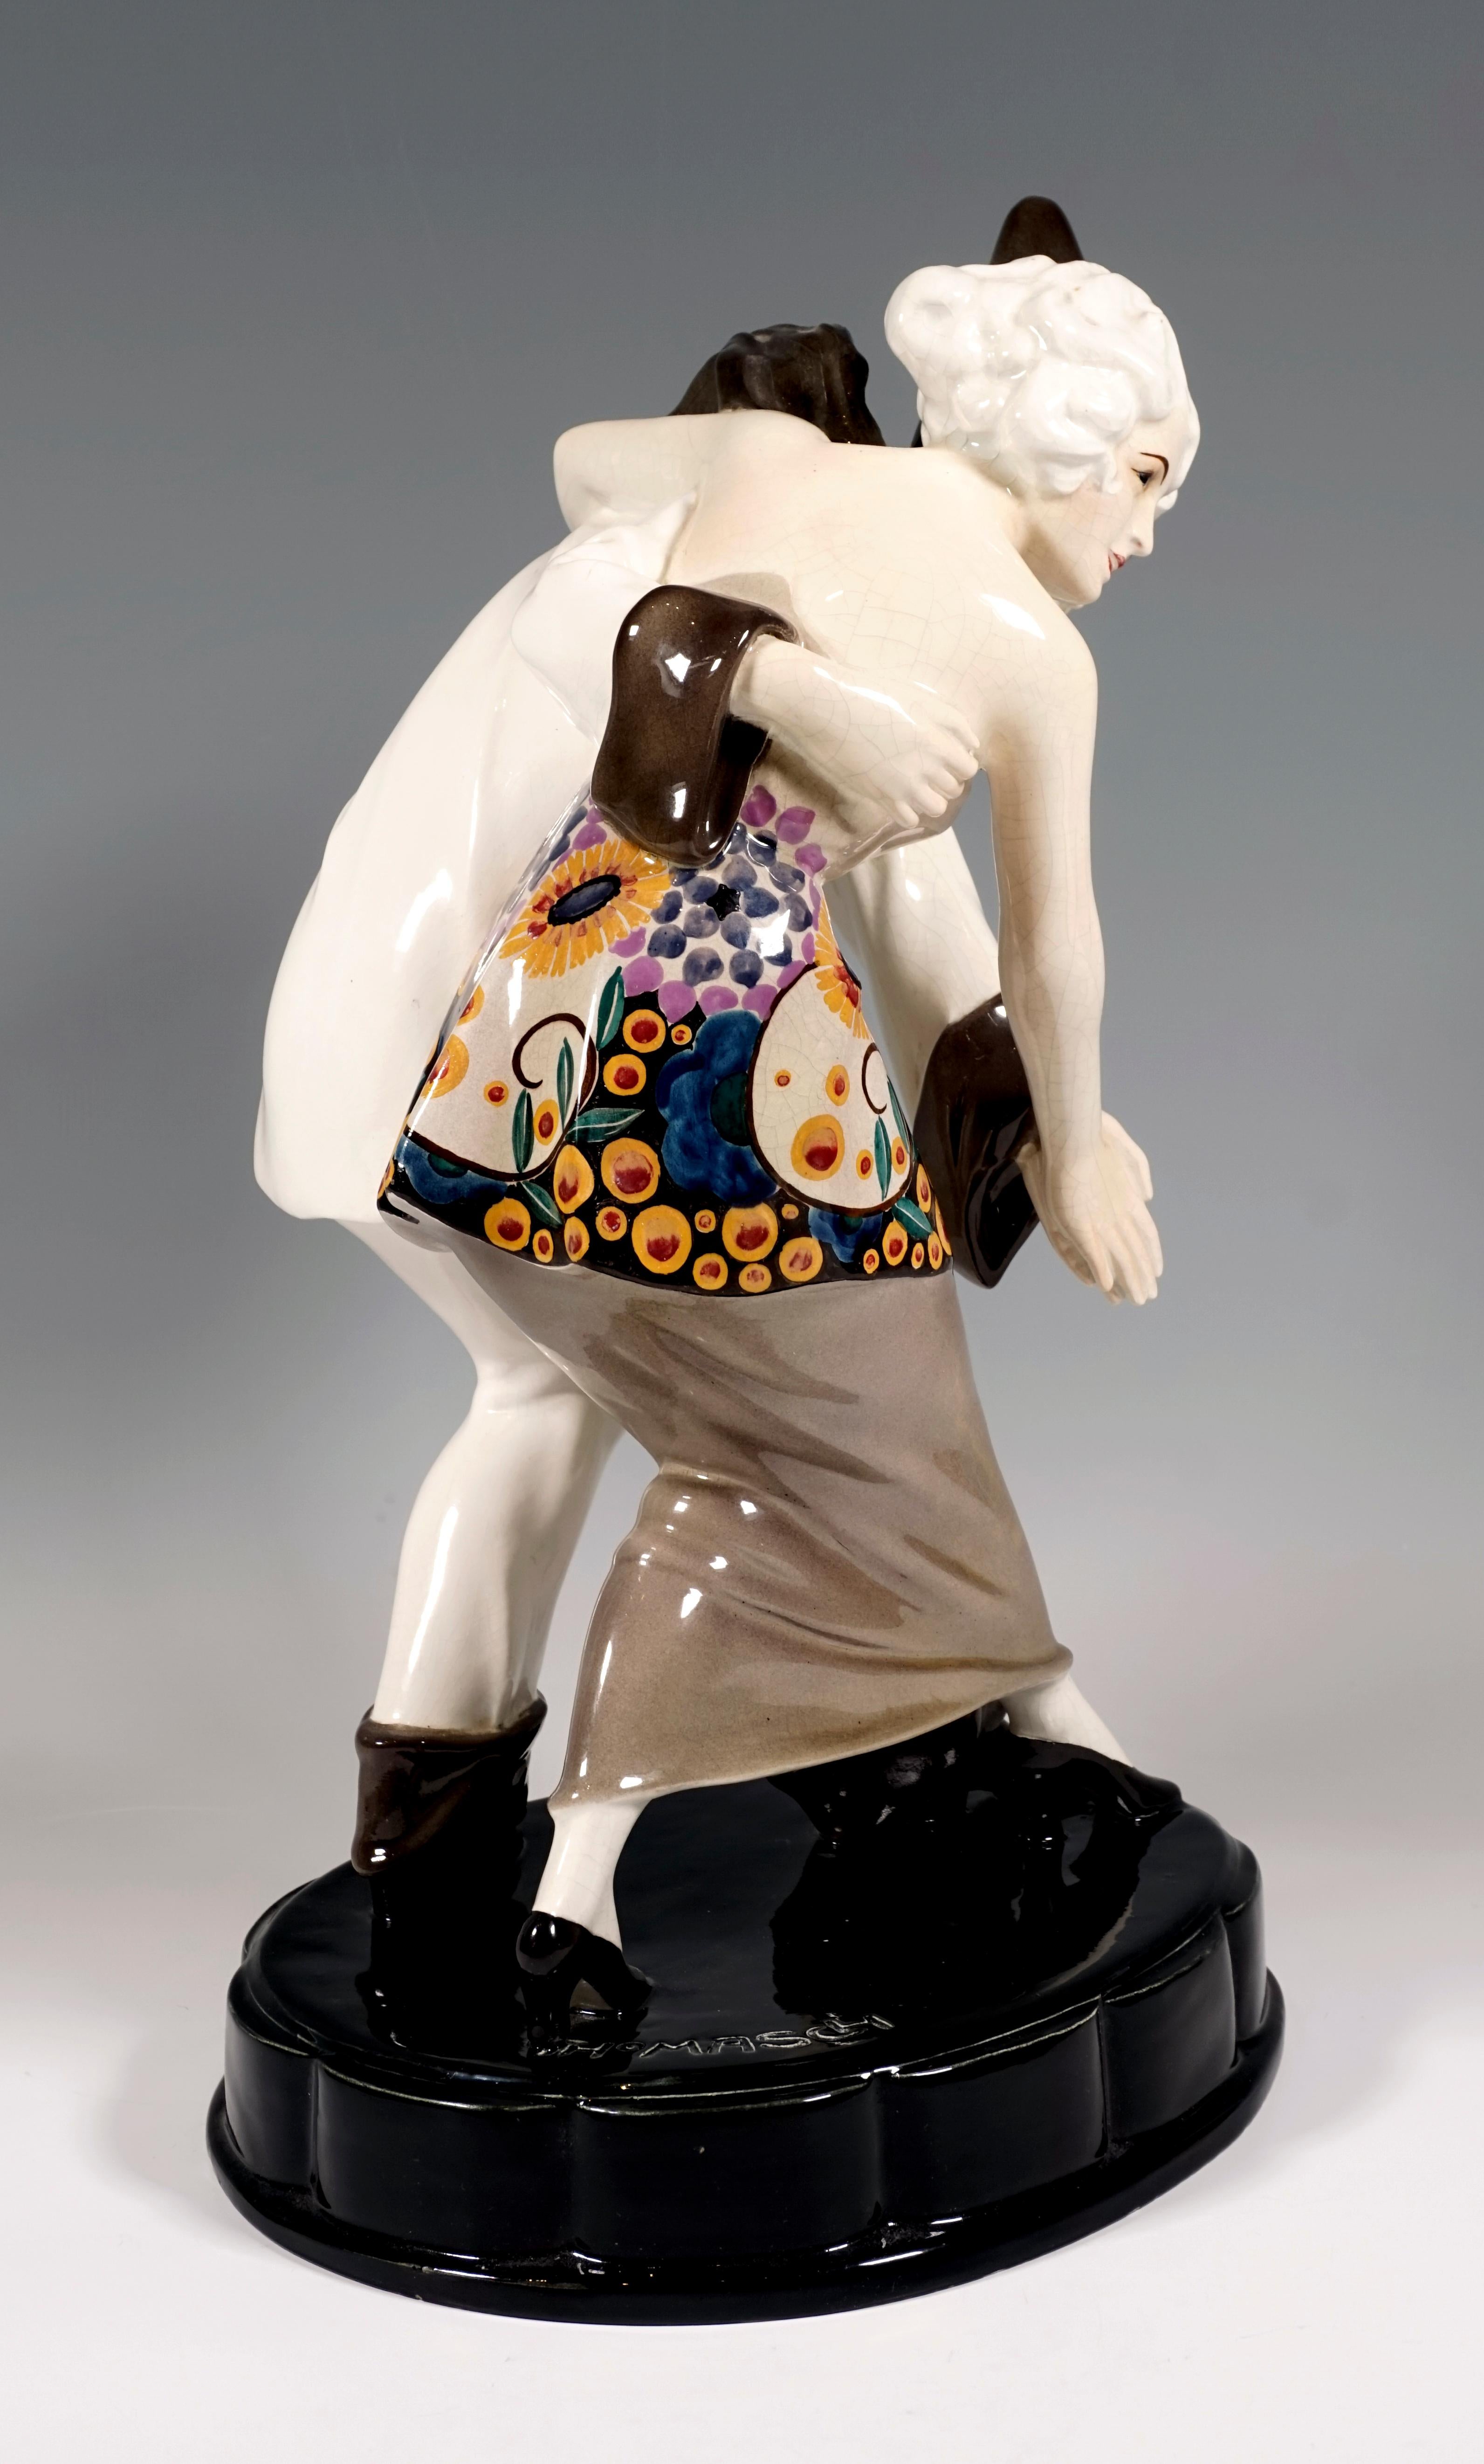 Very rare Art Déco Goldscheider ceramic figurine group:
The Pierrot in a white trouser suit with large gray-brown buttons, cuffs, ruff and pointed hat and the petite dancer with pinned up hair lead a dance step, each laying one arm around the other